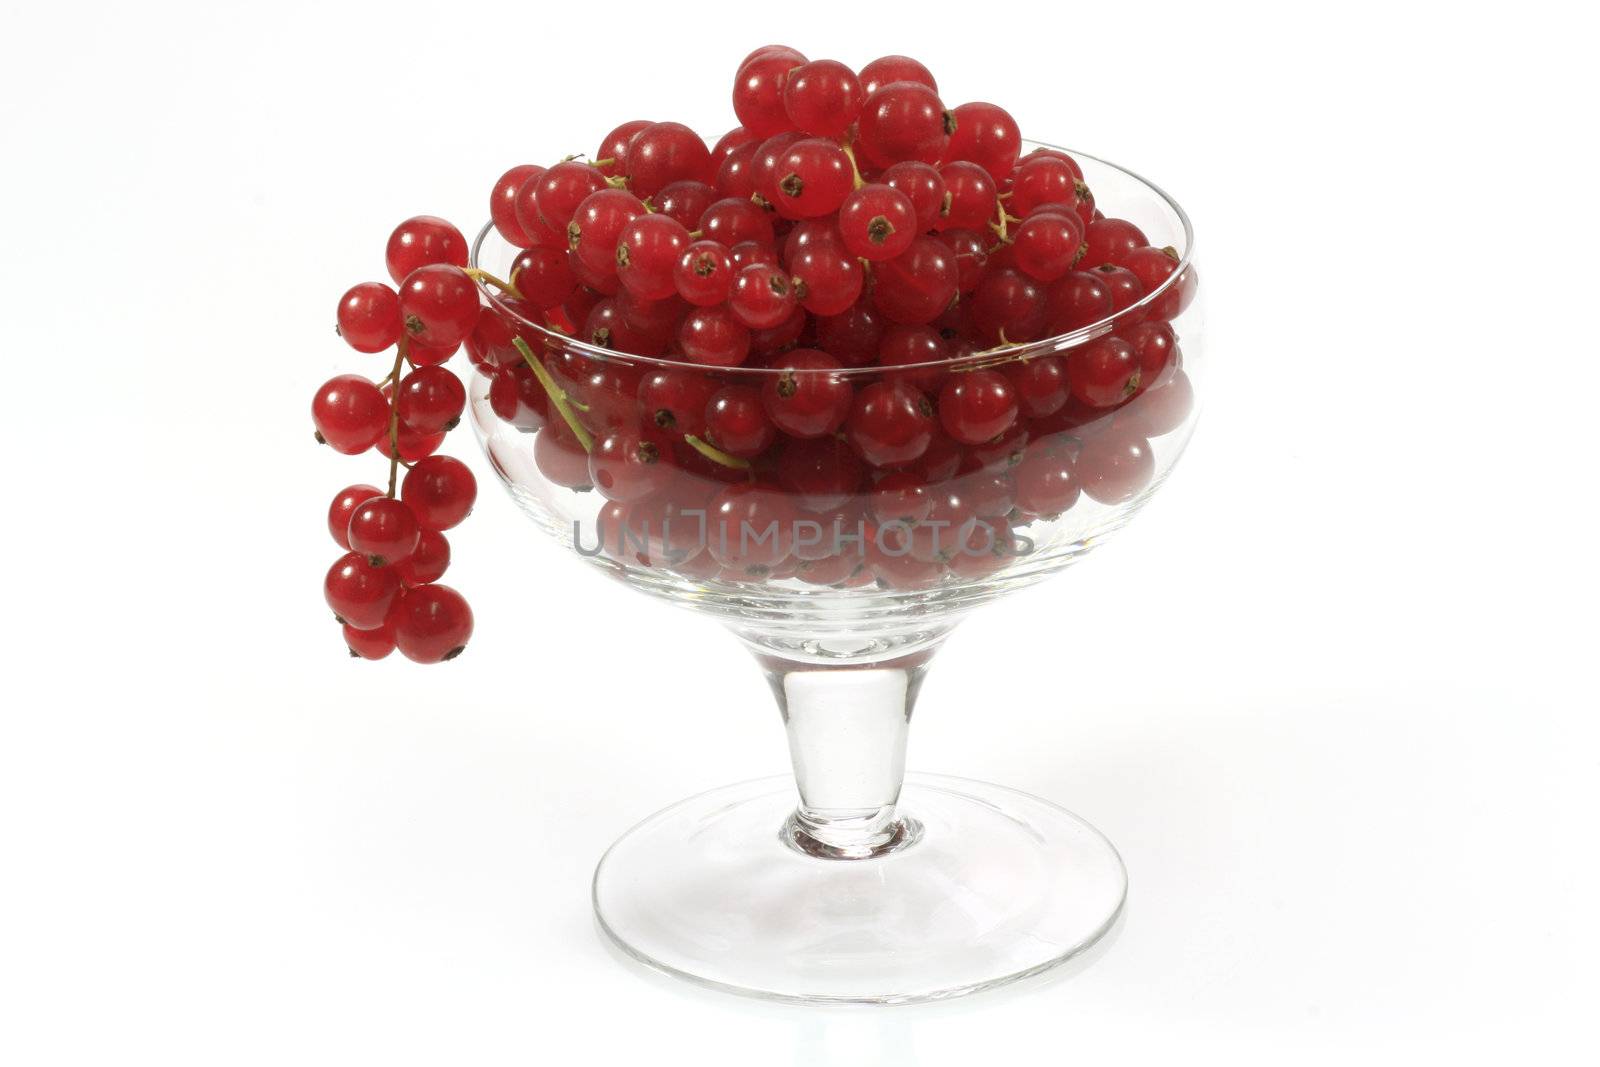 Fresh red currants in a glass over white background